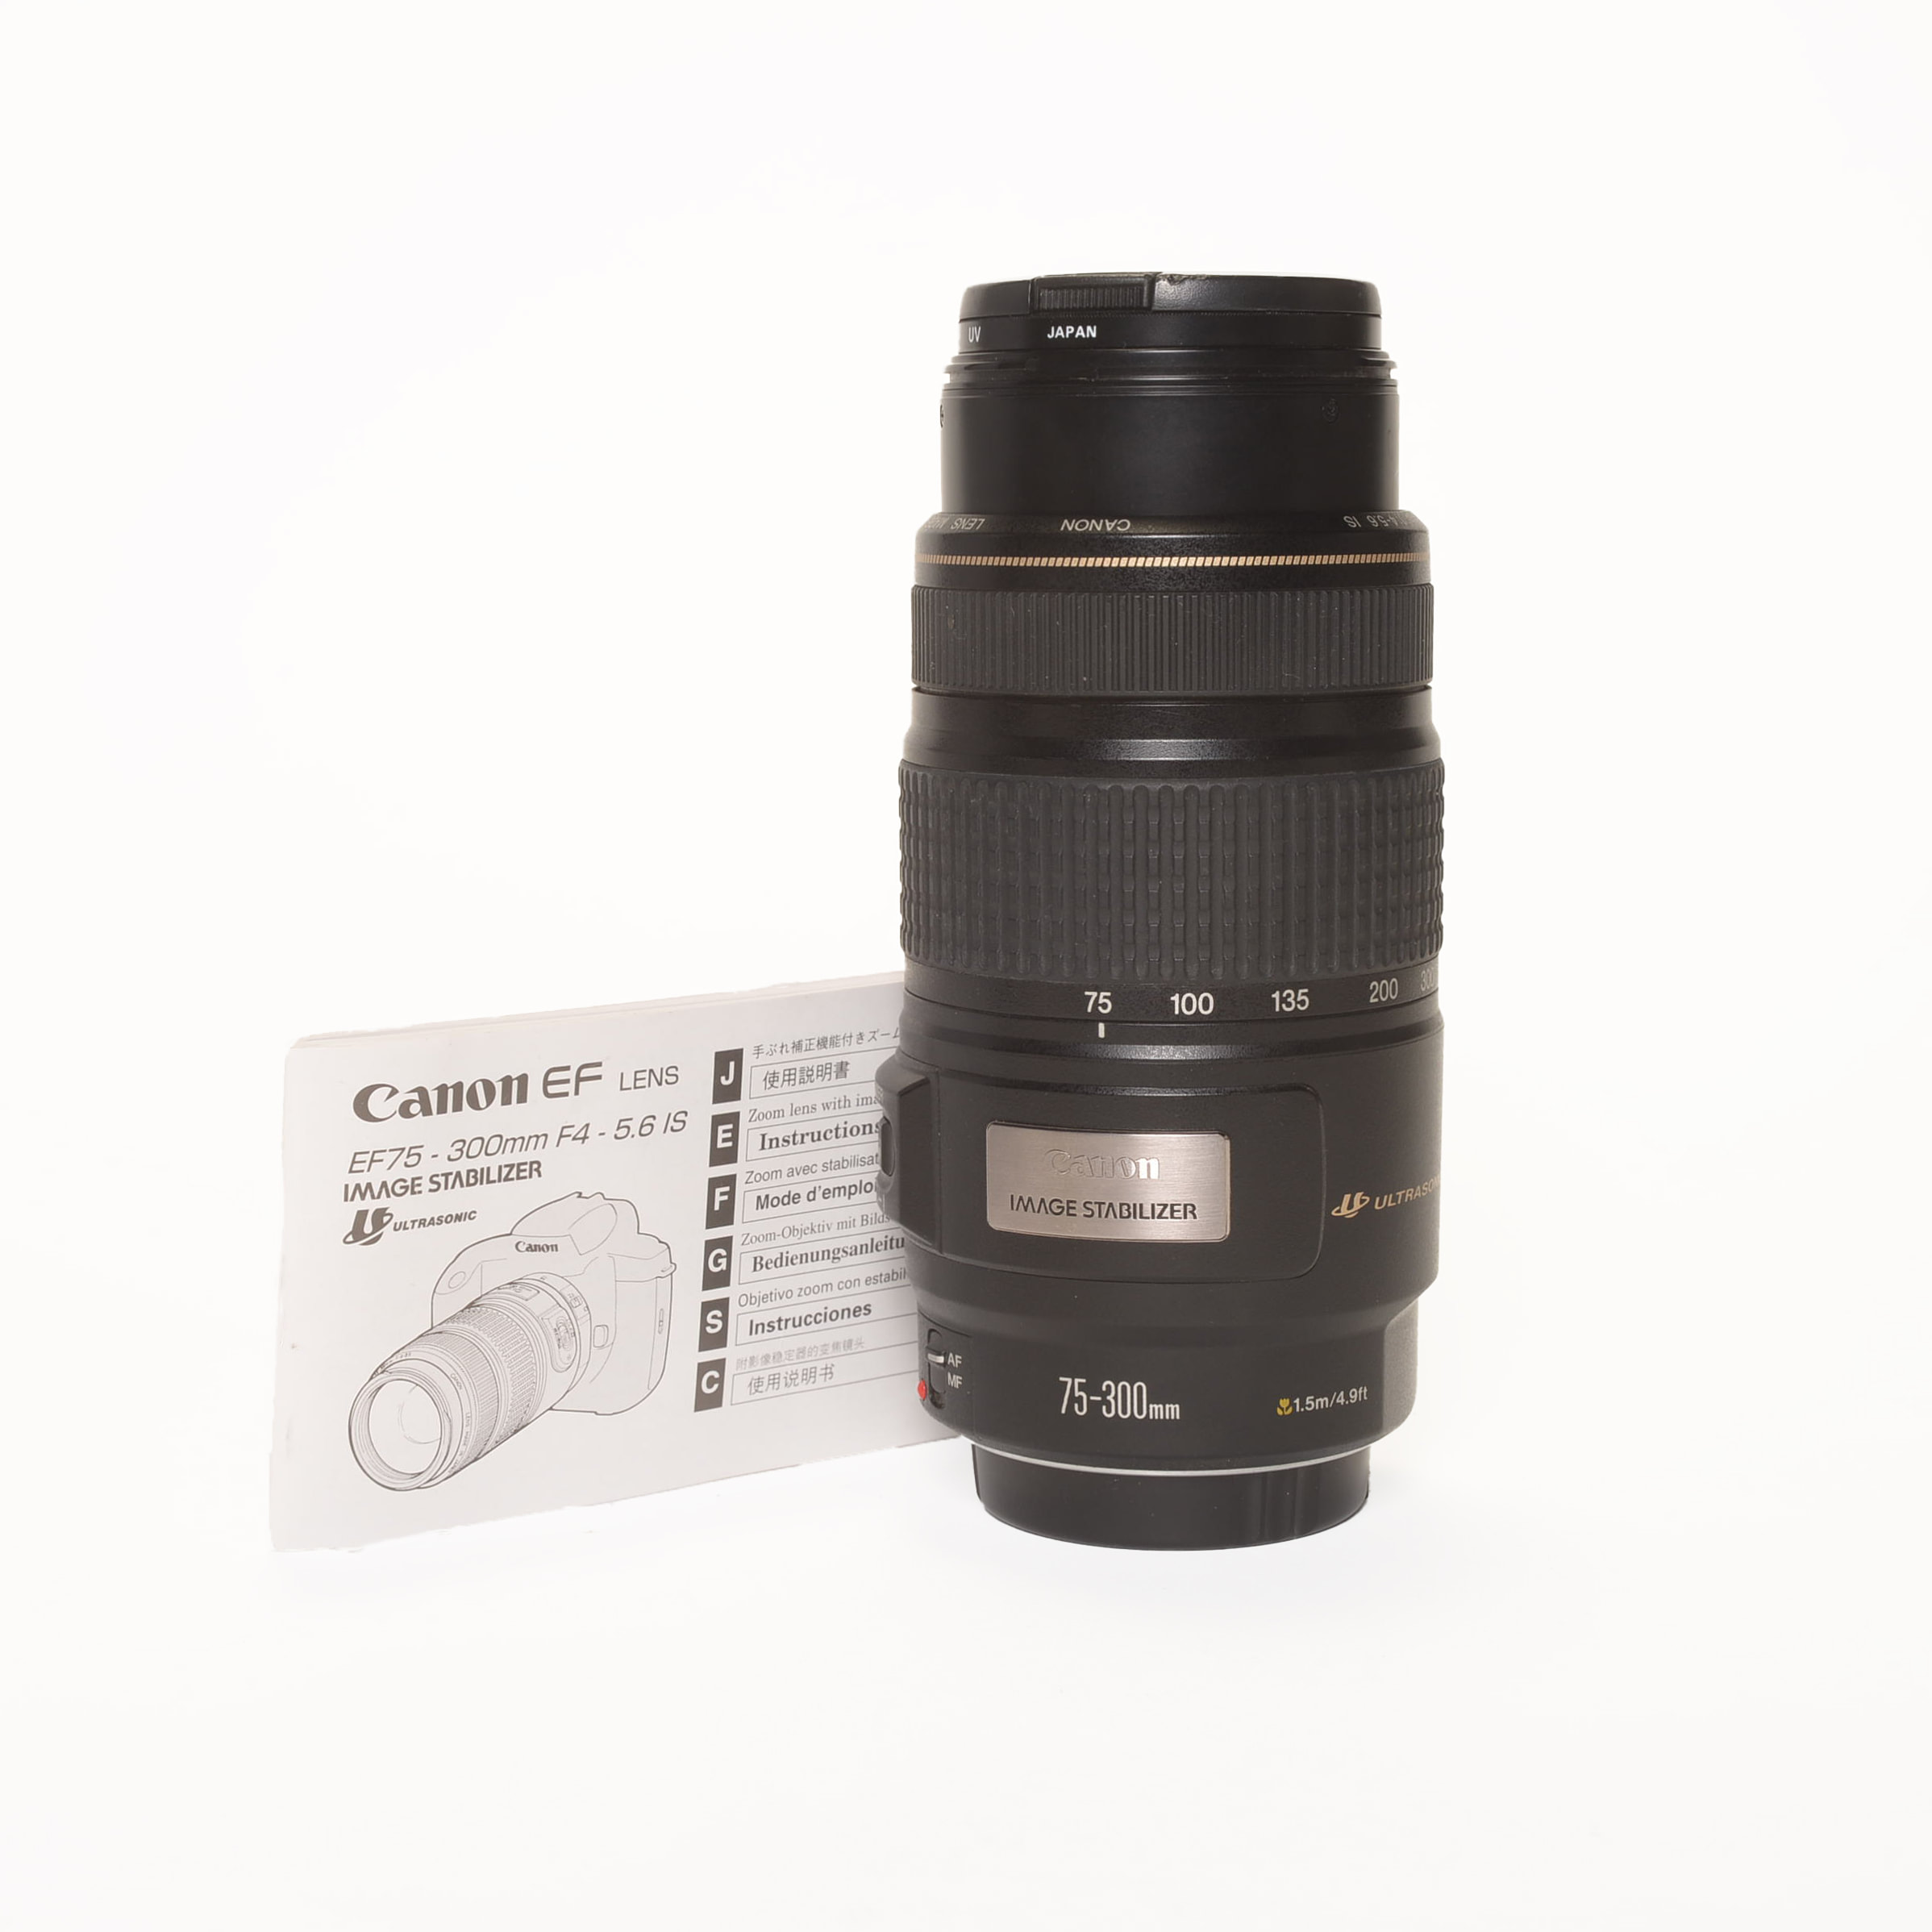 Canon Zoom Lens Ef 75 300mm F4 Pdr Film Photography